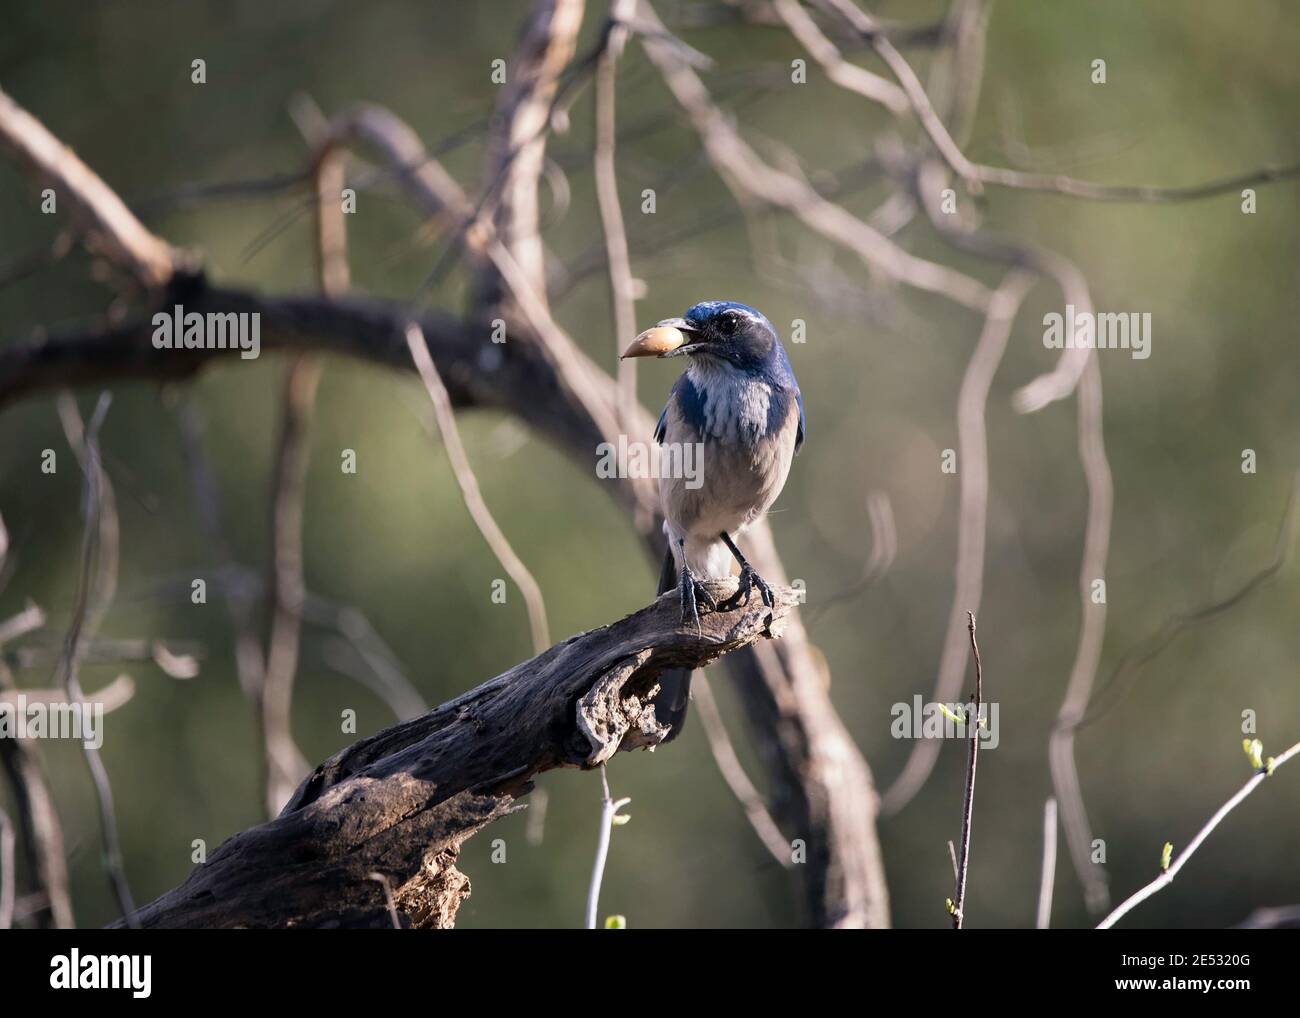 California Scrub-Jay (Aphelocoma californica) holds an acorn in its beak in Franklin Canyon, Los Angeles, CA. Stock Photo